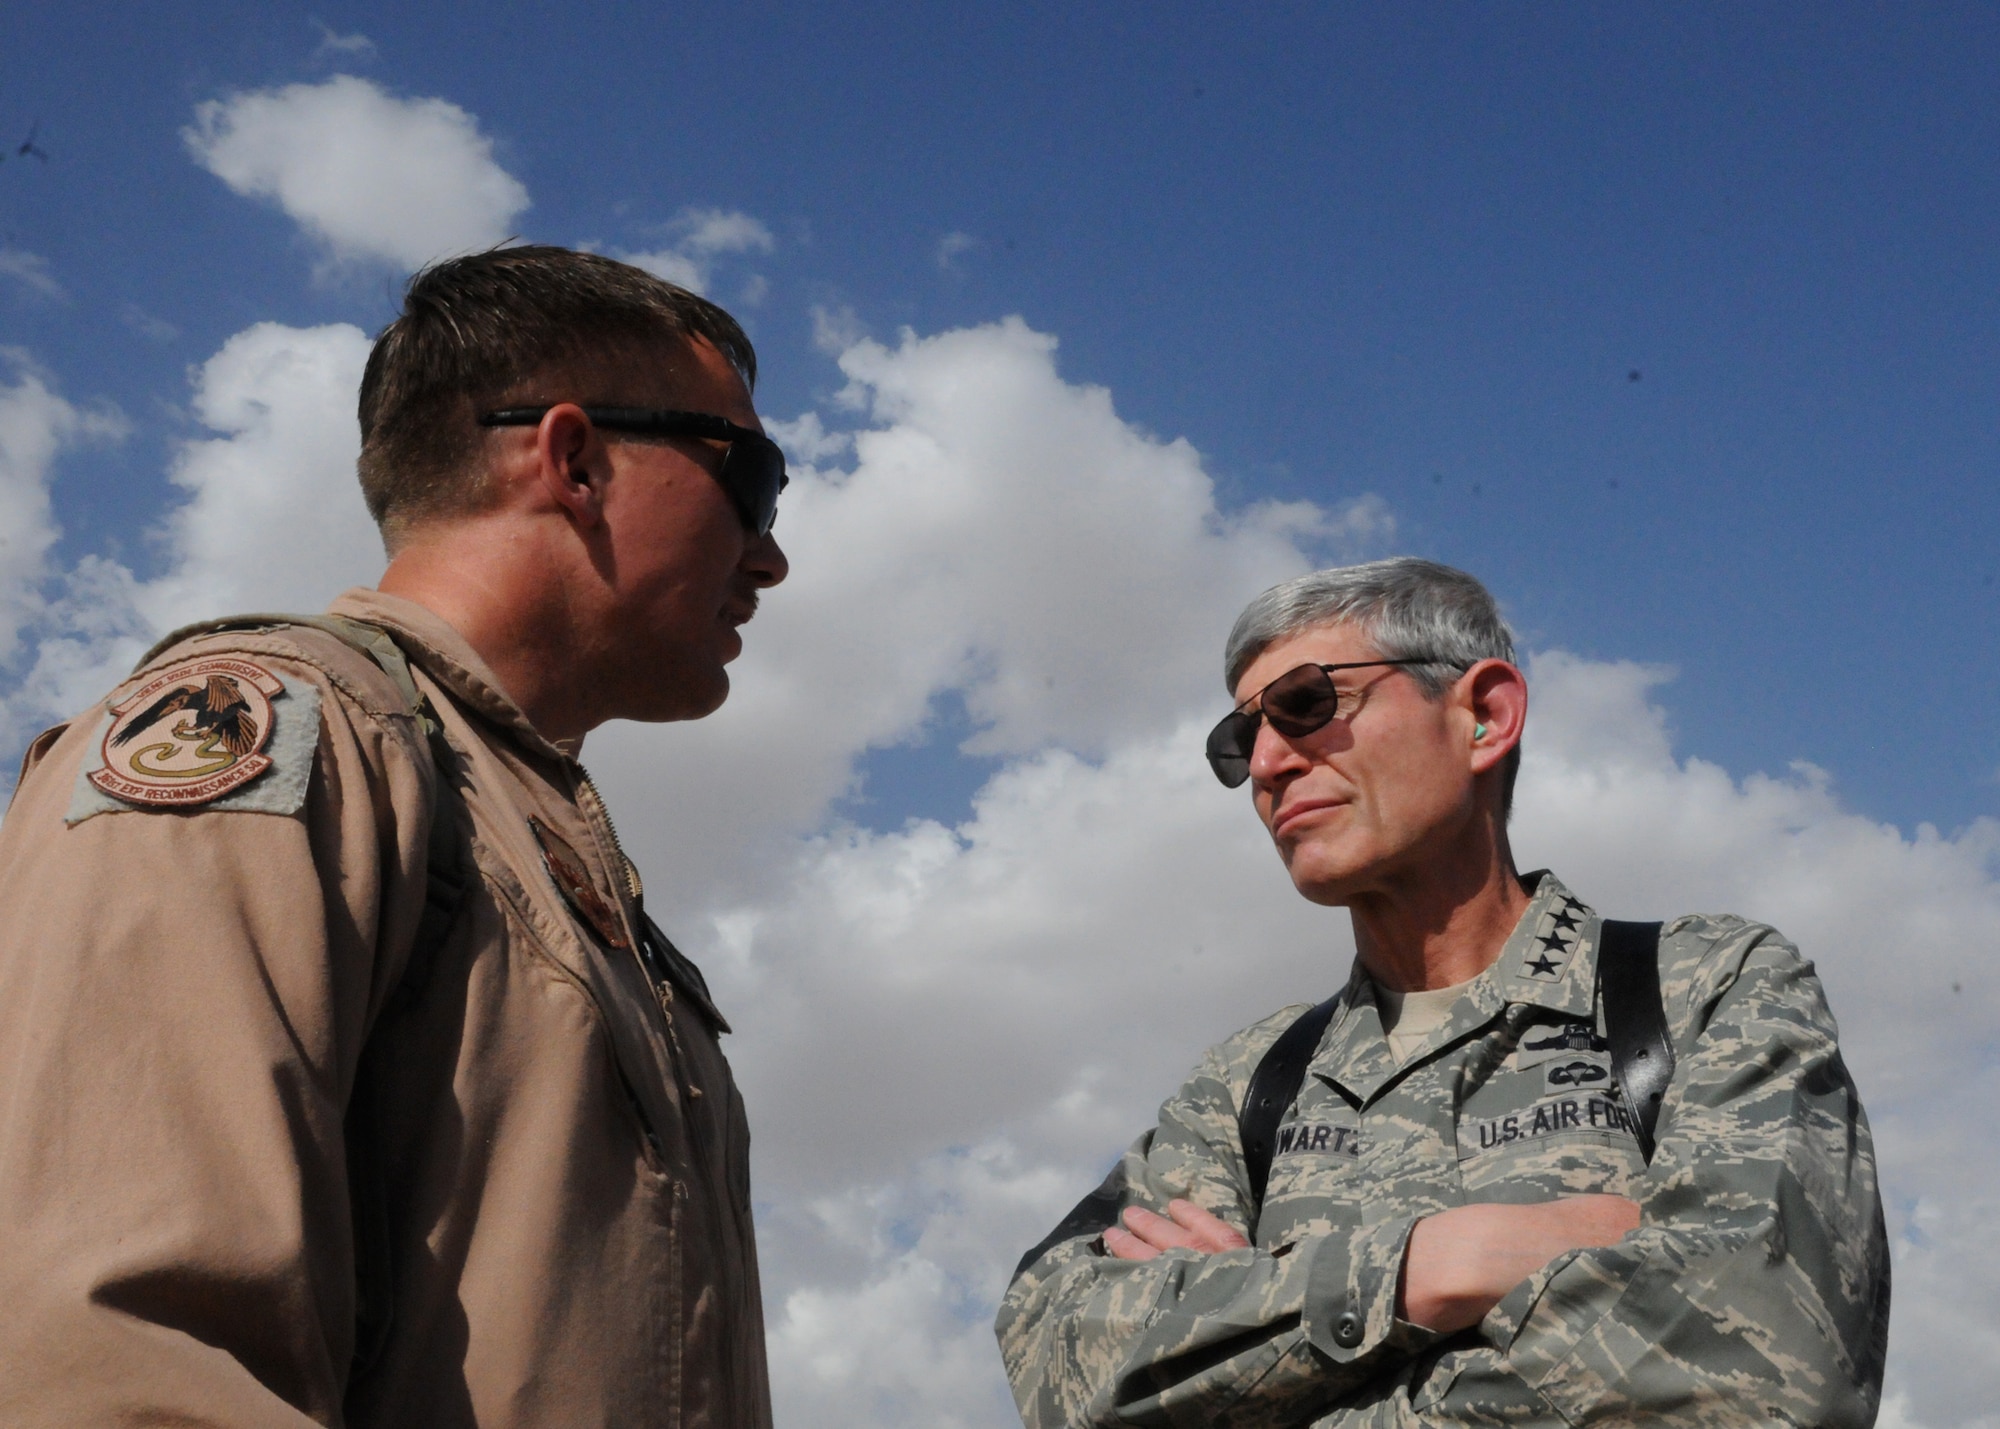 Capt. Joseph Markowski, 361st Expeditionary Reconaissance Squadron MC-12W pilot and mission commander, briefs Air Force Chief of Staff Gen. Norton Schwartz on the 451st Expeditionary Operations Group’s various missions at Kandahar Airfield, Afghanistan, April 24, 2012. Schwartz said his goal during the visit to Afghanistan was to meet and talk with as many deployed Airmen as possible.  (U.S. Air Force photo/Staff Sgt. Heather Skinkle)